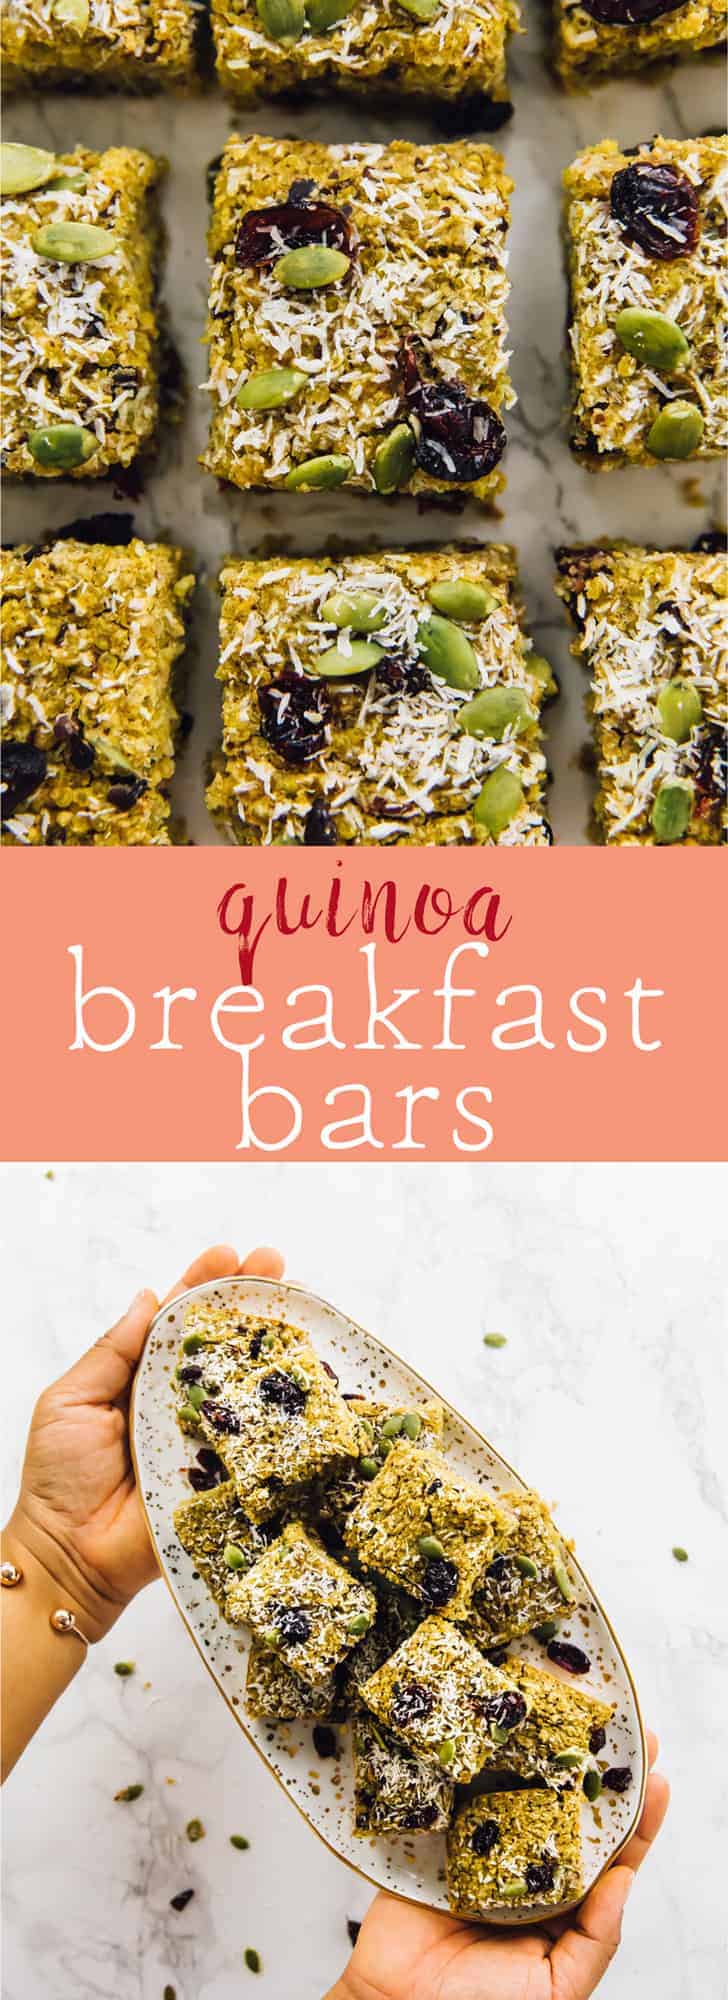   Here's my Progress Morning Routine! It helps me to wake up, feel energised, and get the day started! I'm also sharing a recipe for delicious, protein-packed quinoa breakfast bars! via https://jessicainthekitchen.com 